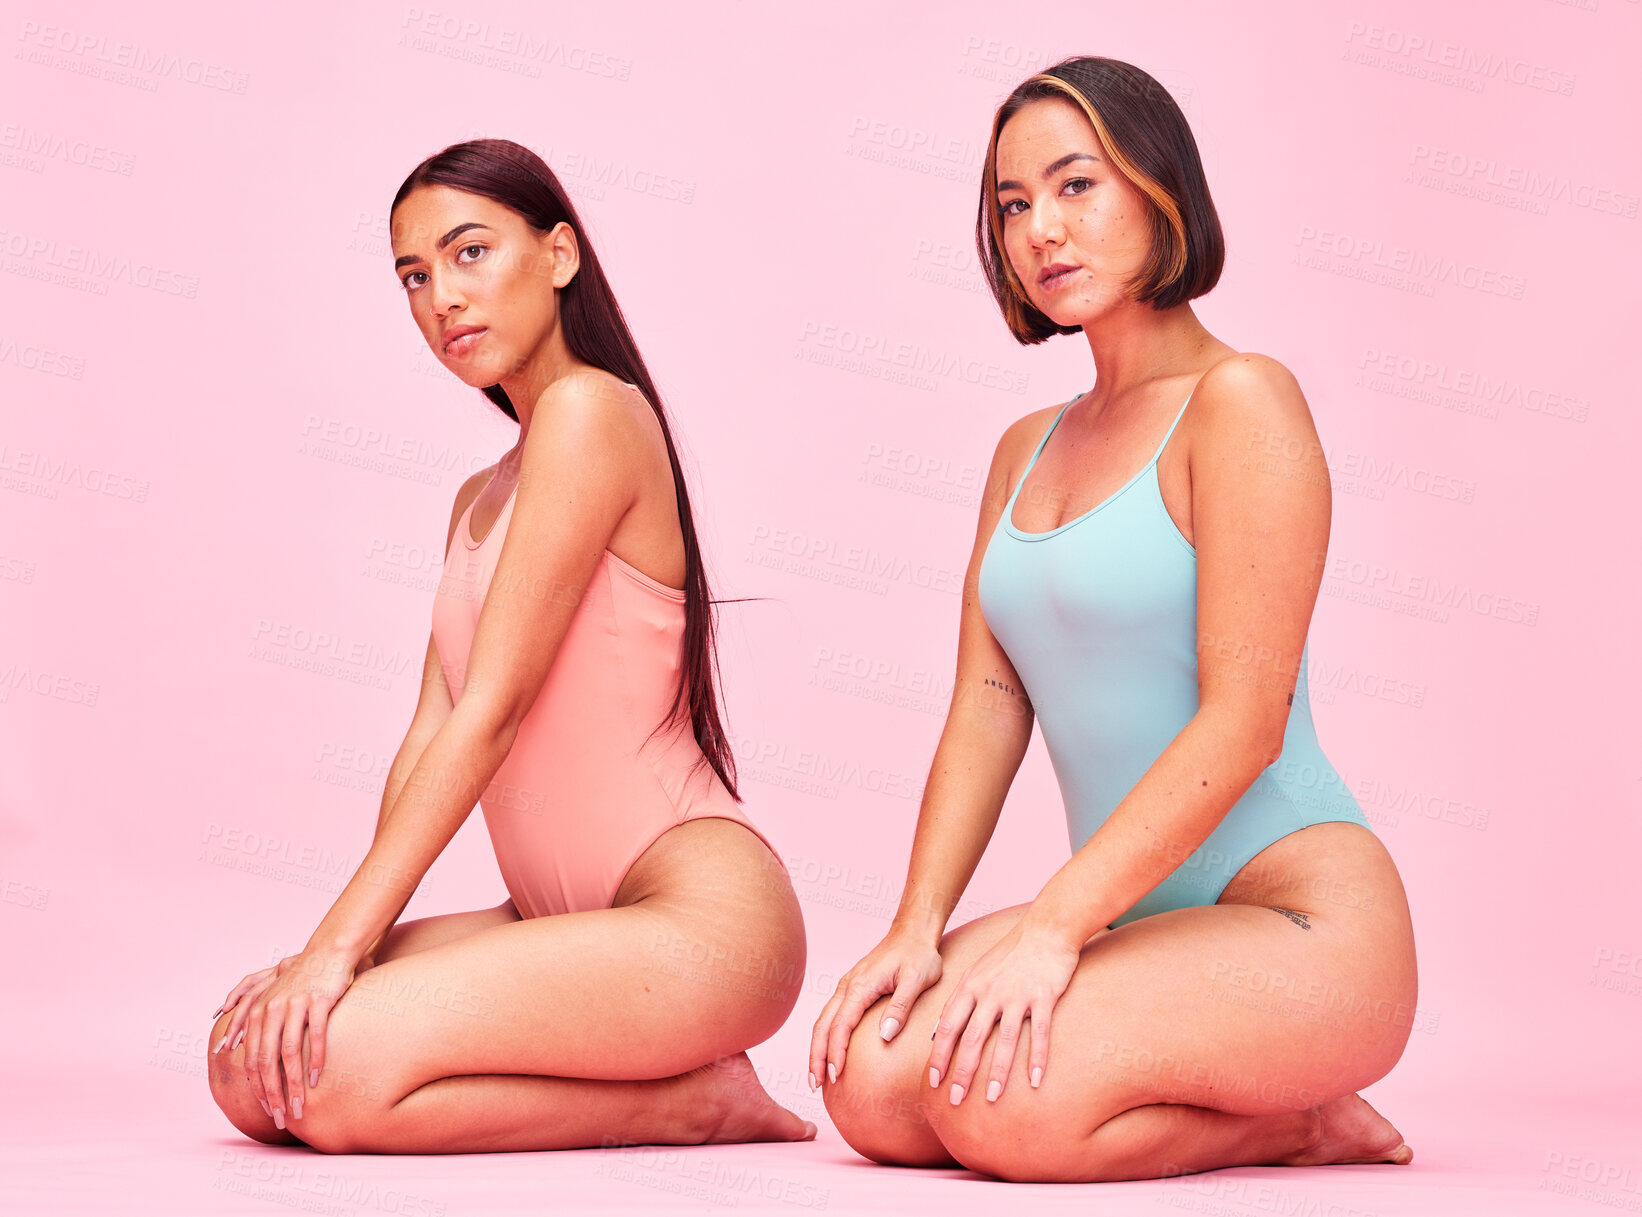 Buy stock photo Diversity, swimwear and portrait of women in studio, sitting together with glow and body positivity swimwear. Beauty, summer fashion and bikini models with self love, equality and pink background.